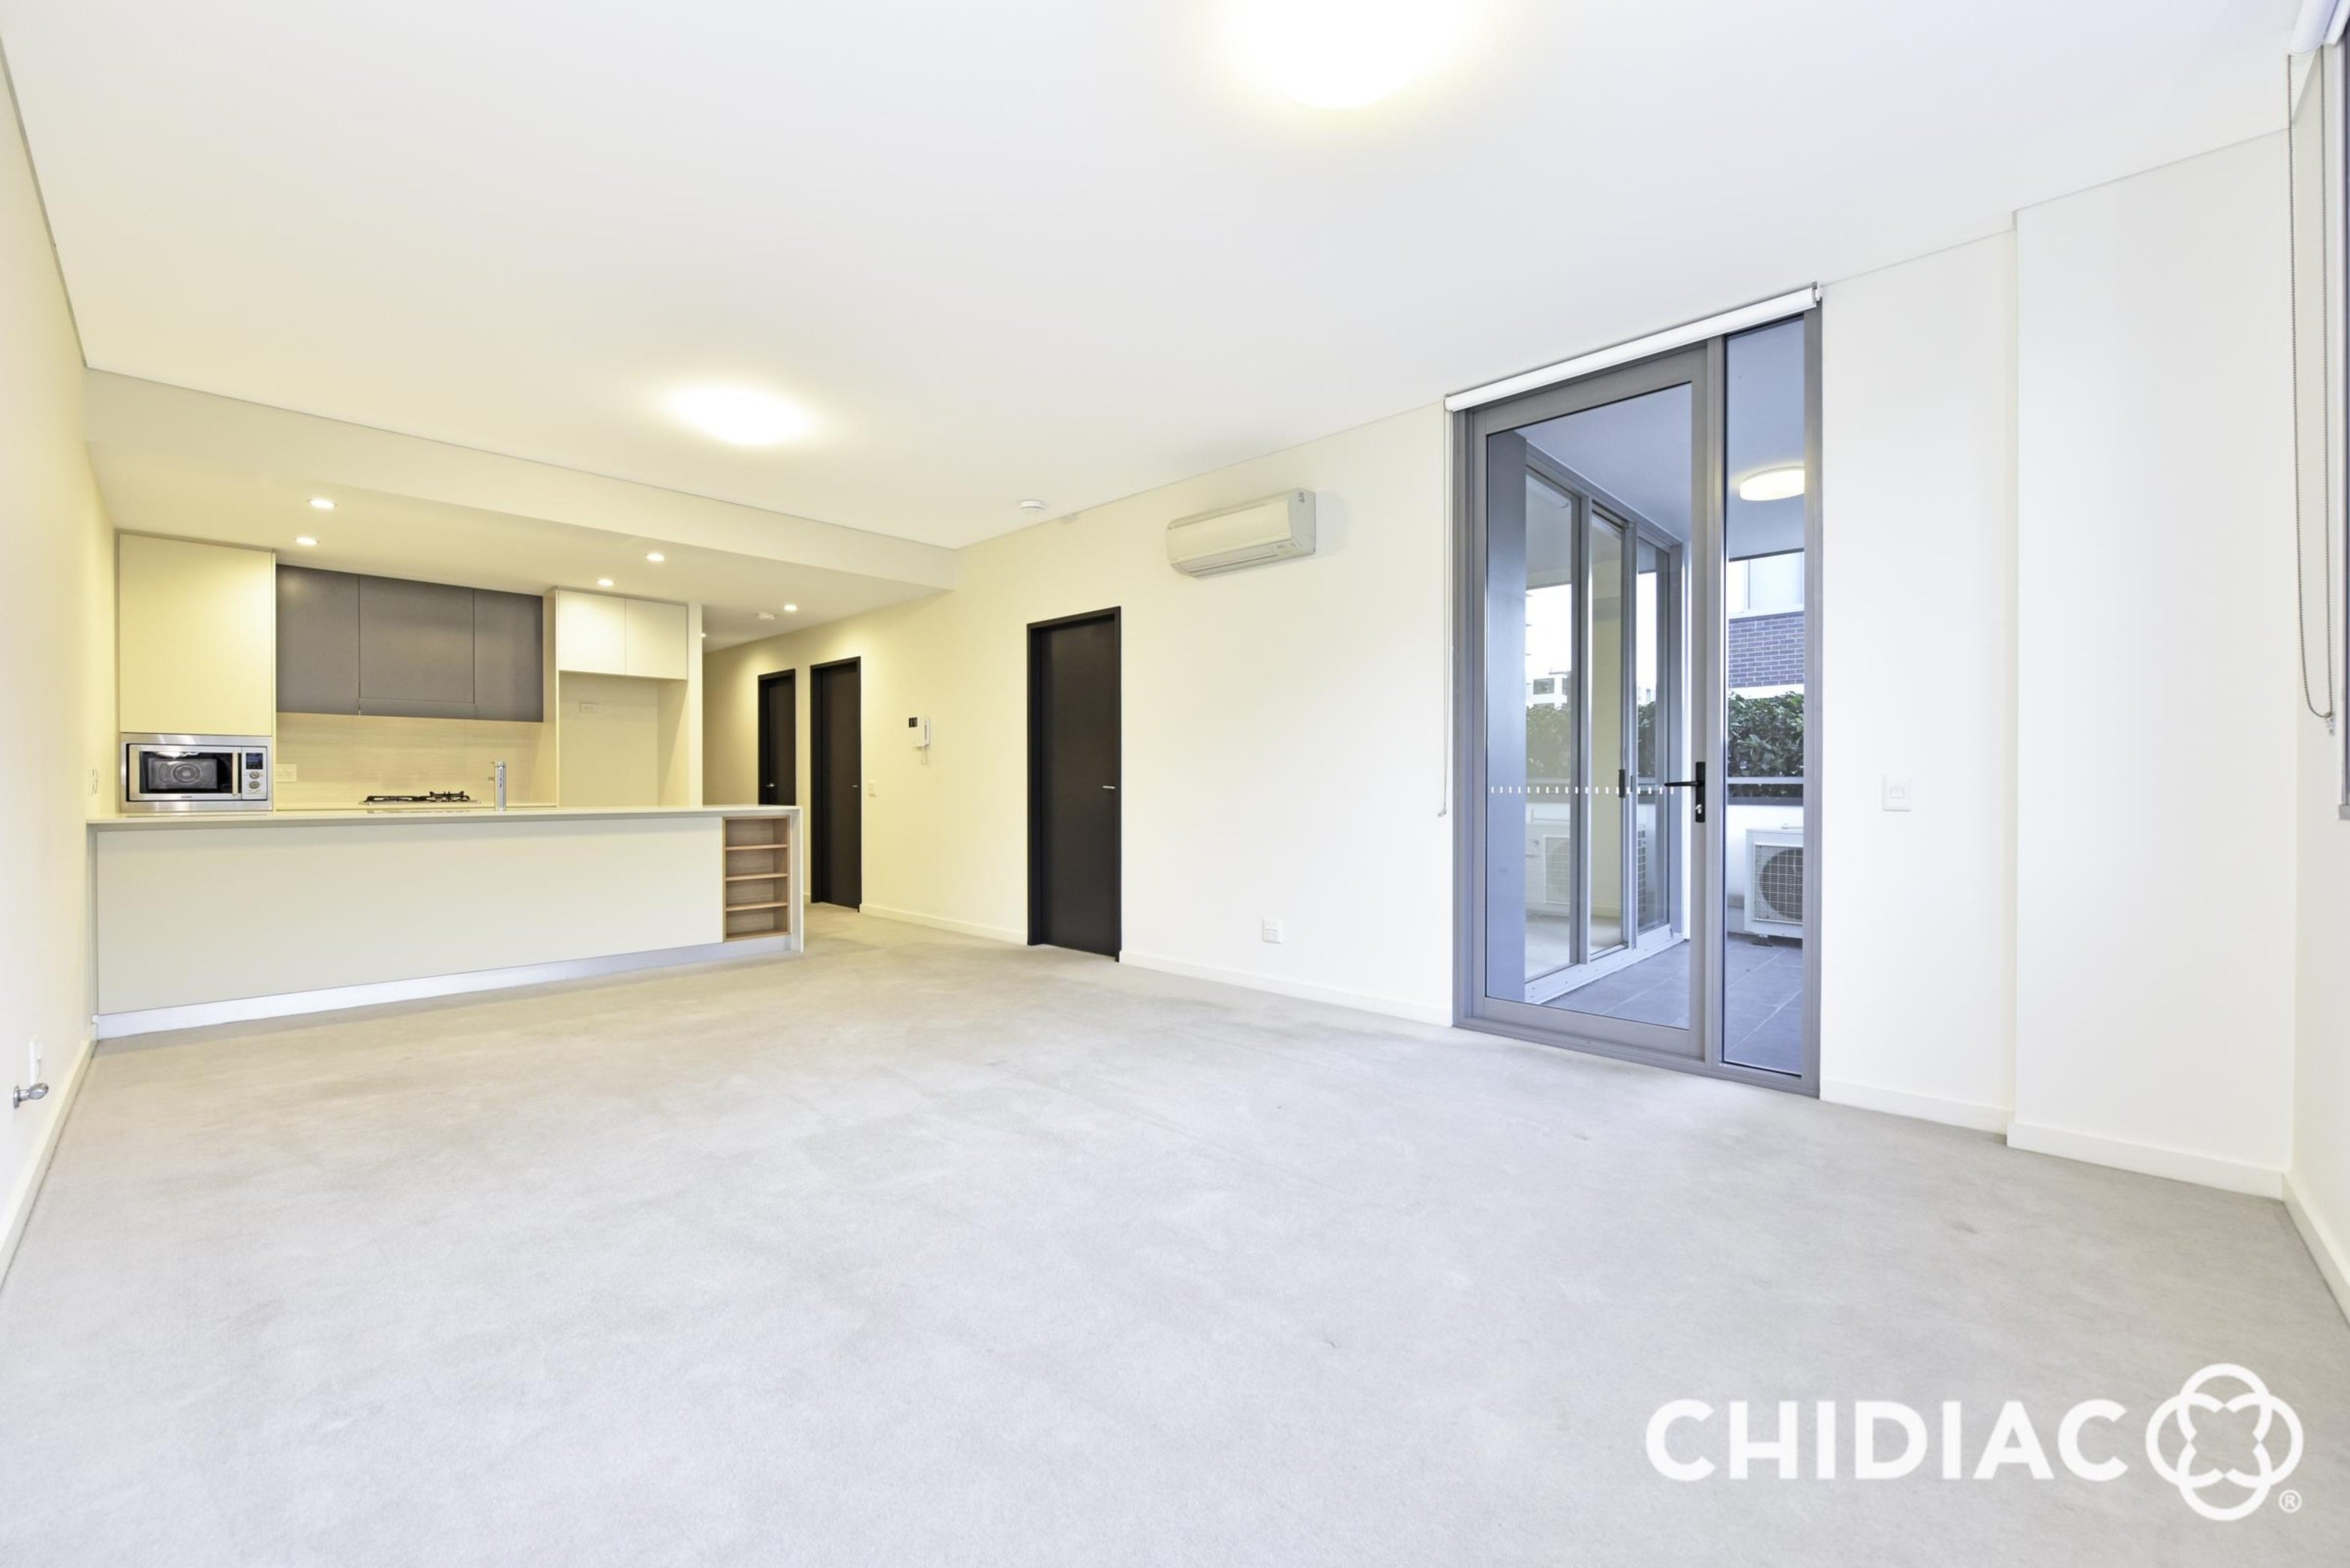 201/10 Savona Drive, Wentworth Point Leased by Chidiac Realty - image 1